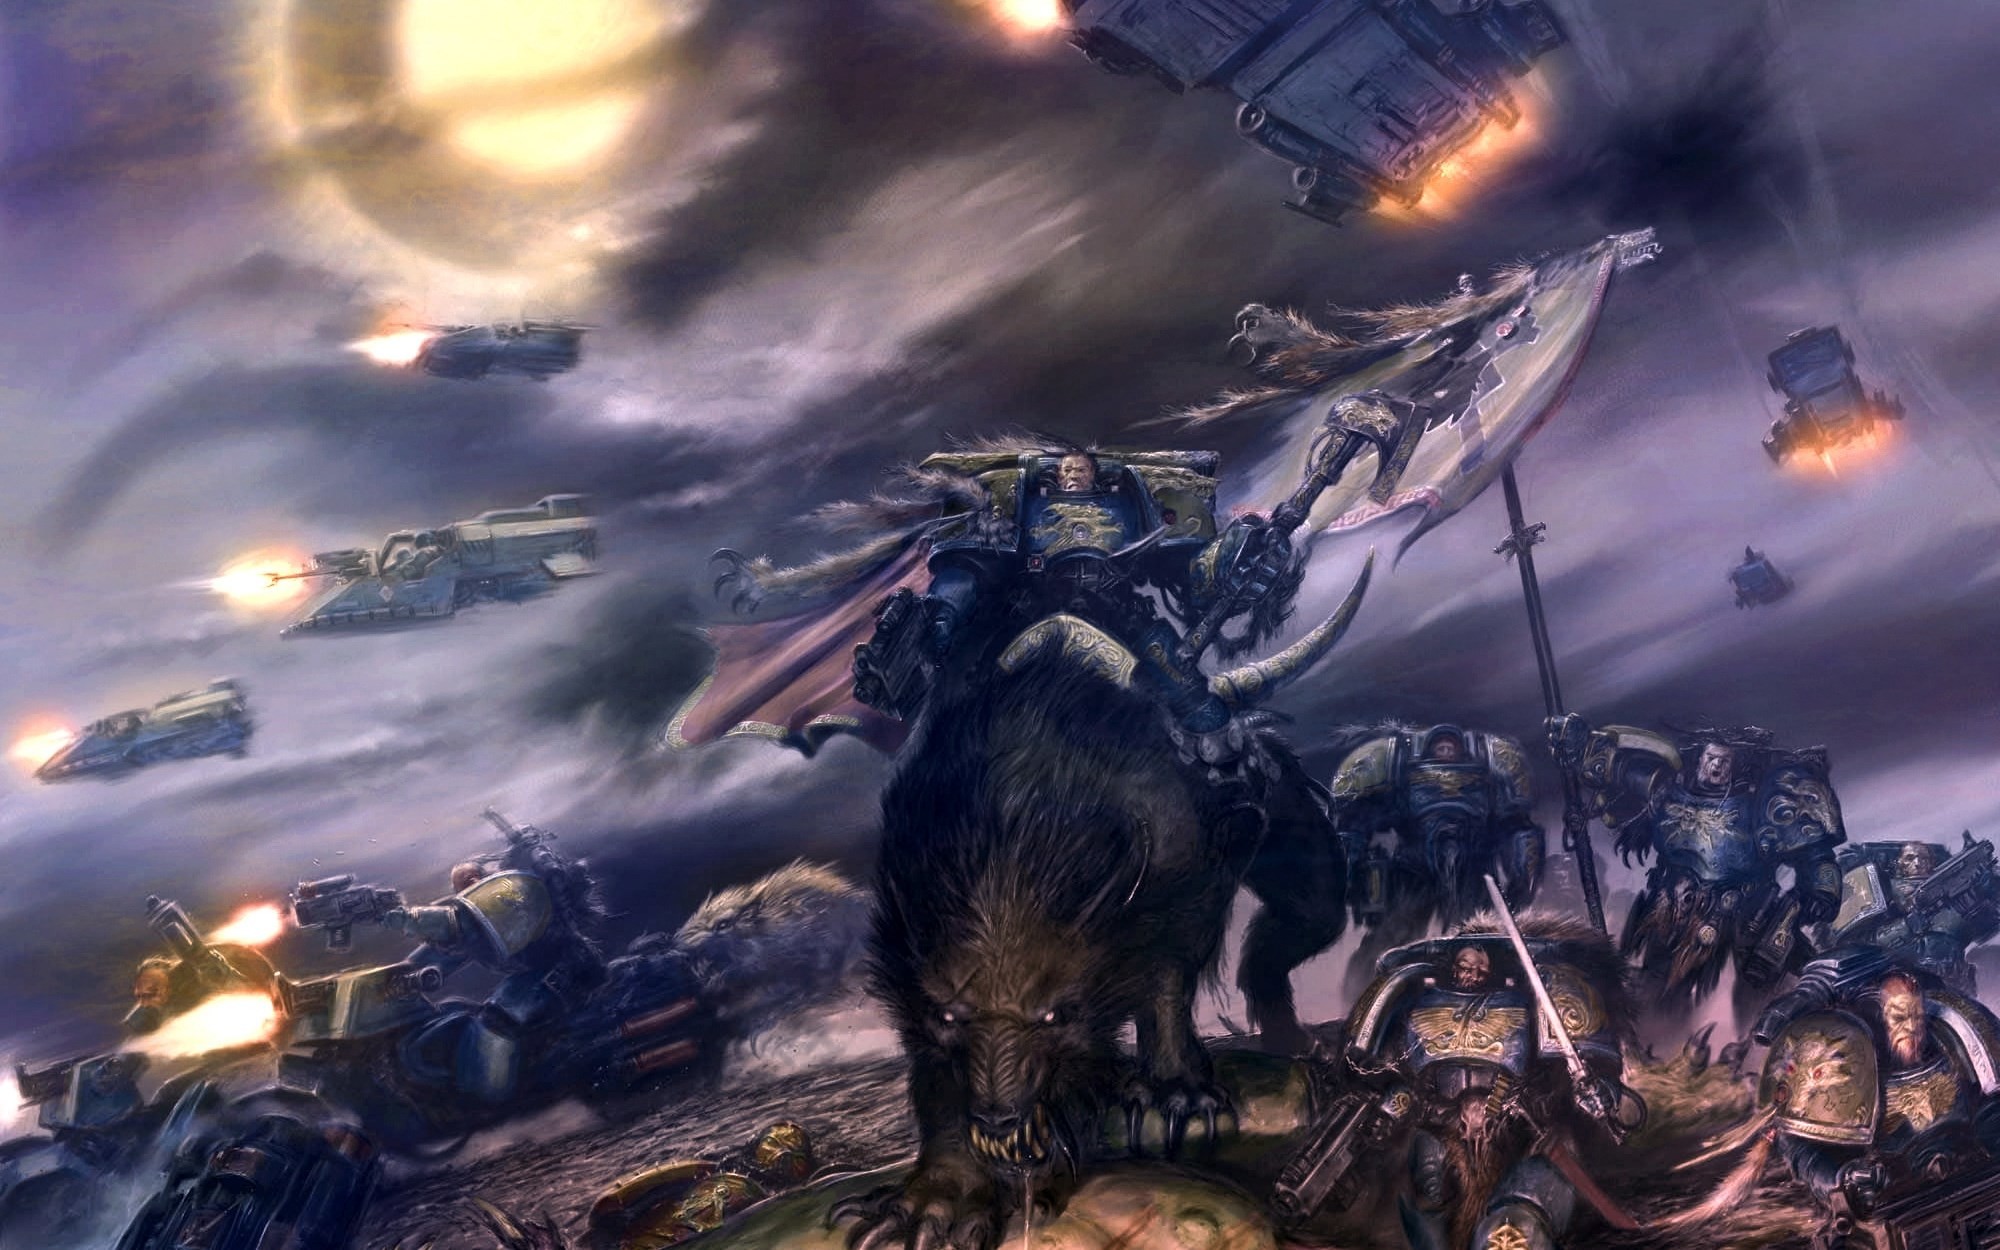 2000x1250  px warhammer 40k pic - Full HD Wallpapers, Photos by Ripley Backer